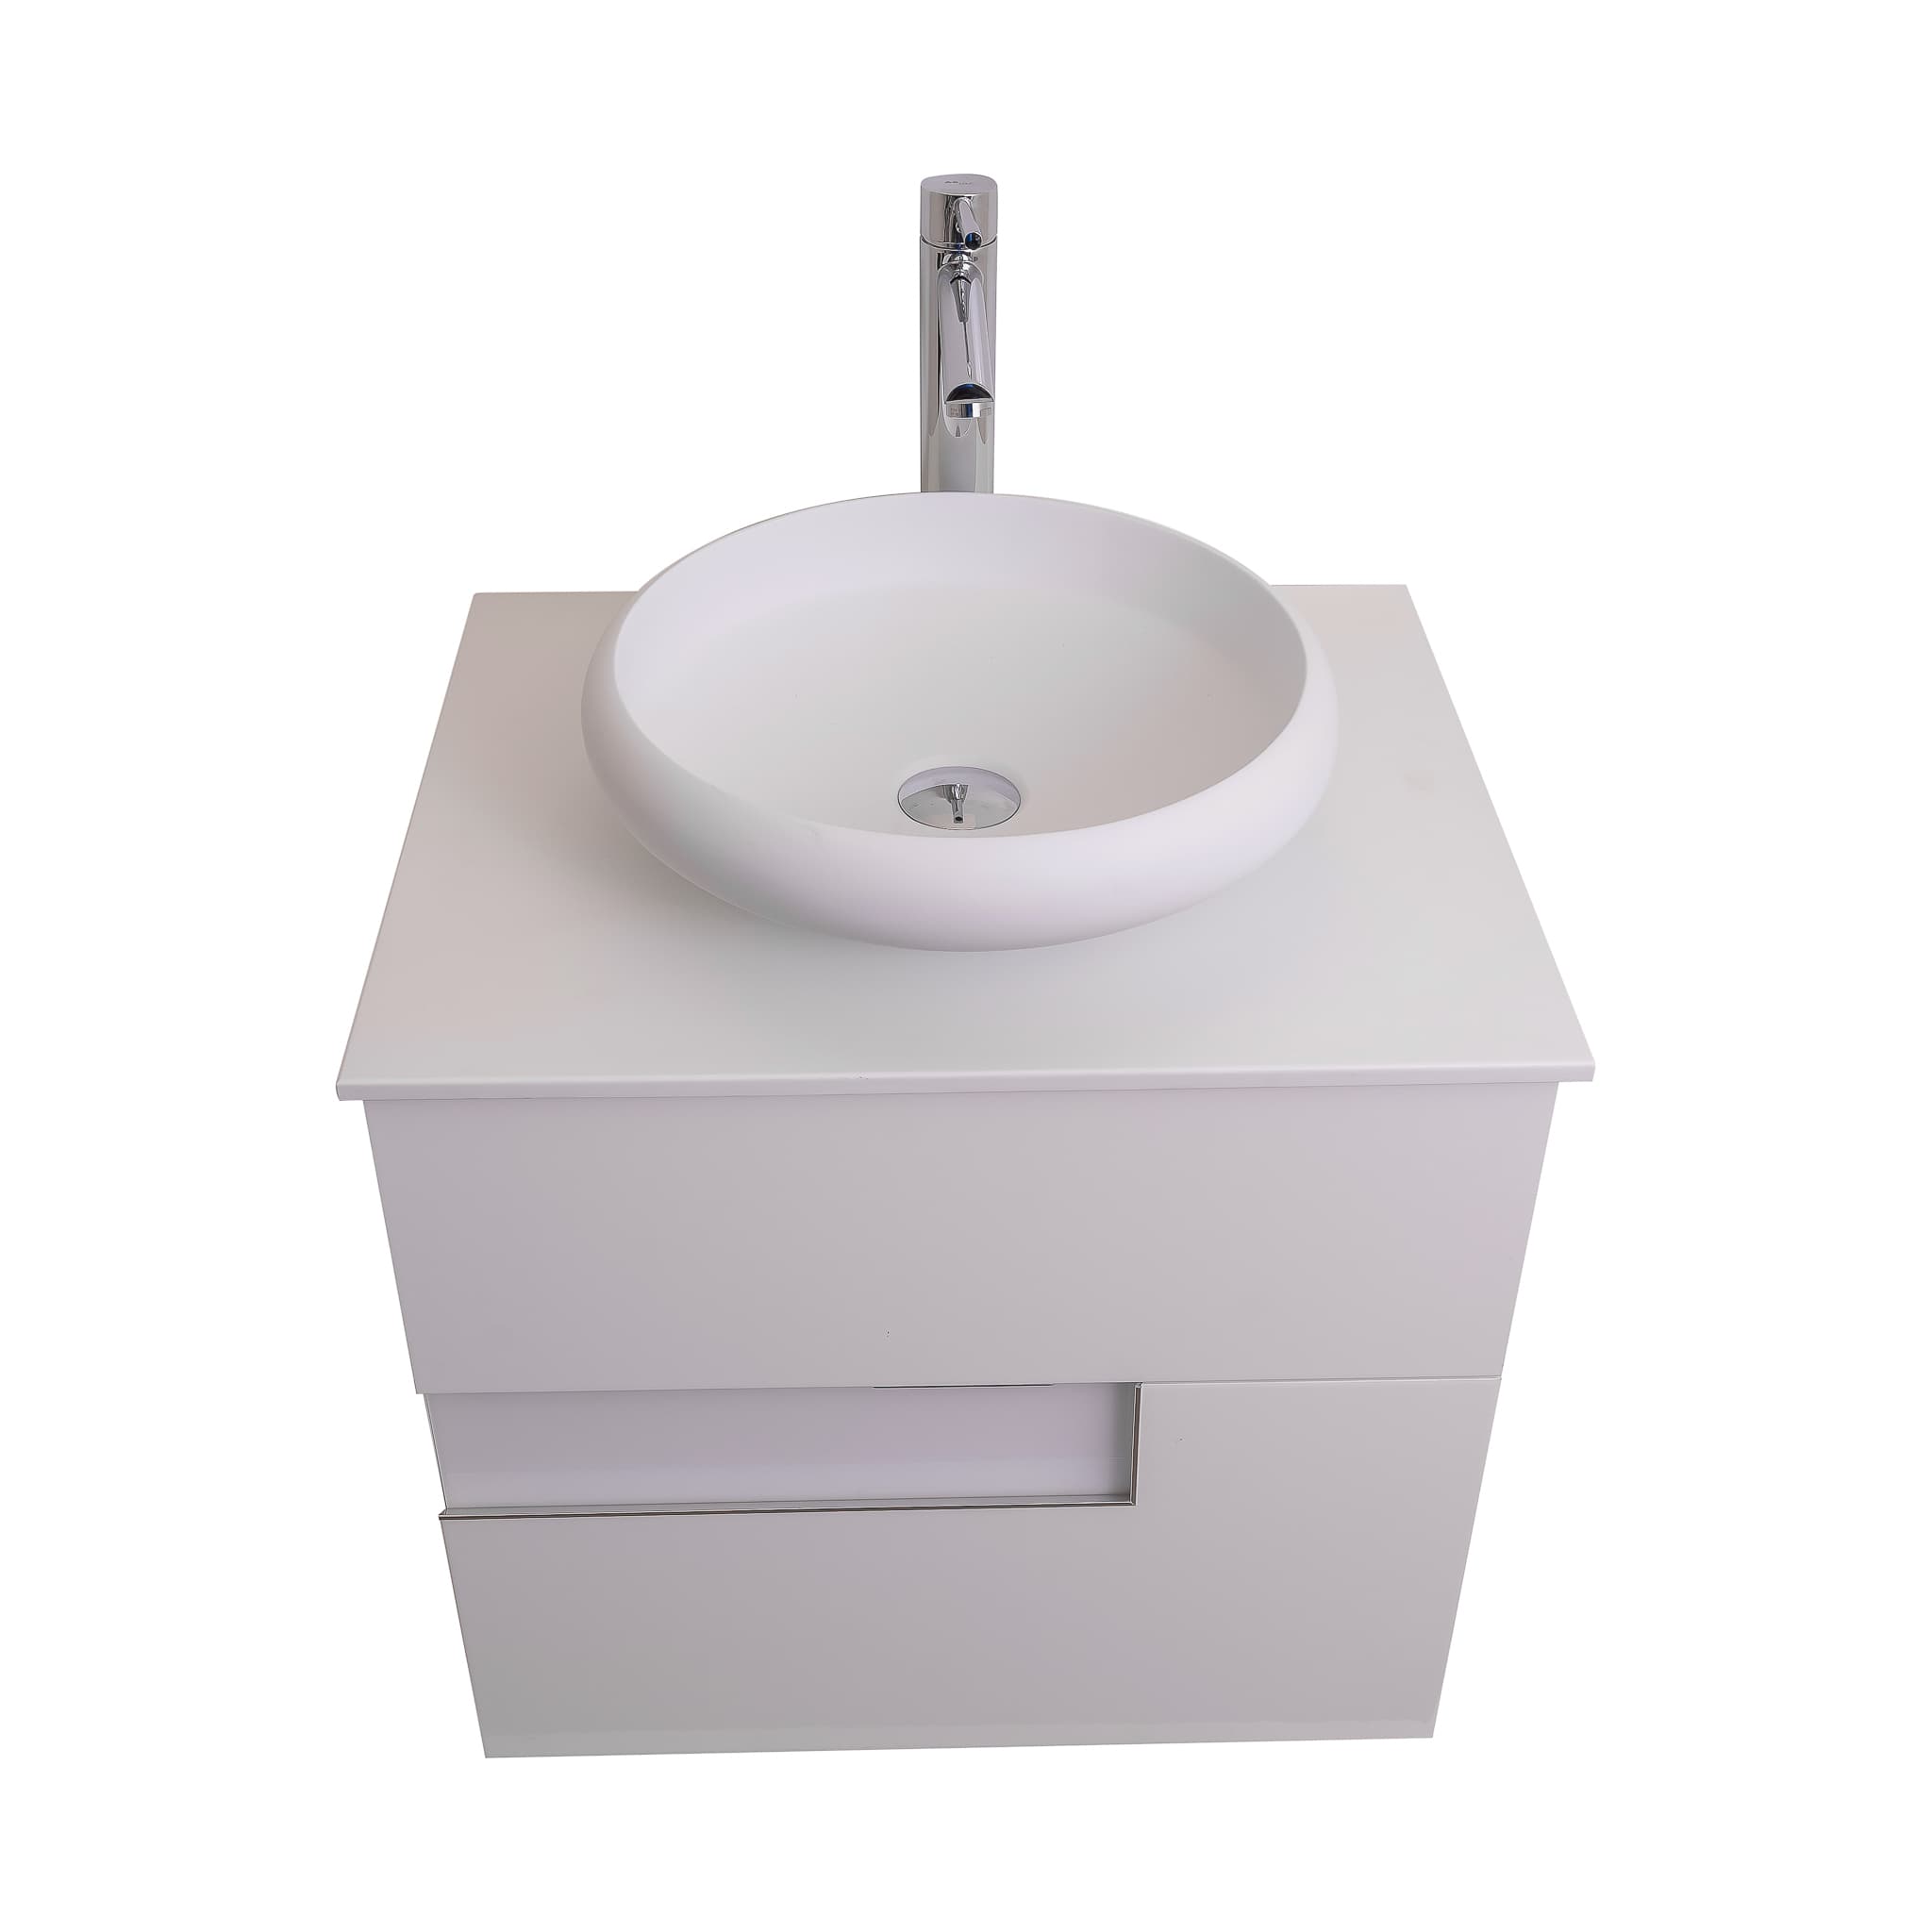 Vision 23.5 White High Gloss Cabinet, Solid Surface Flat White Counter And Round Solid Surface White Basin 1153, Wall Mounted Modern Vanity Set